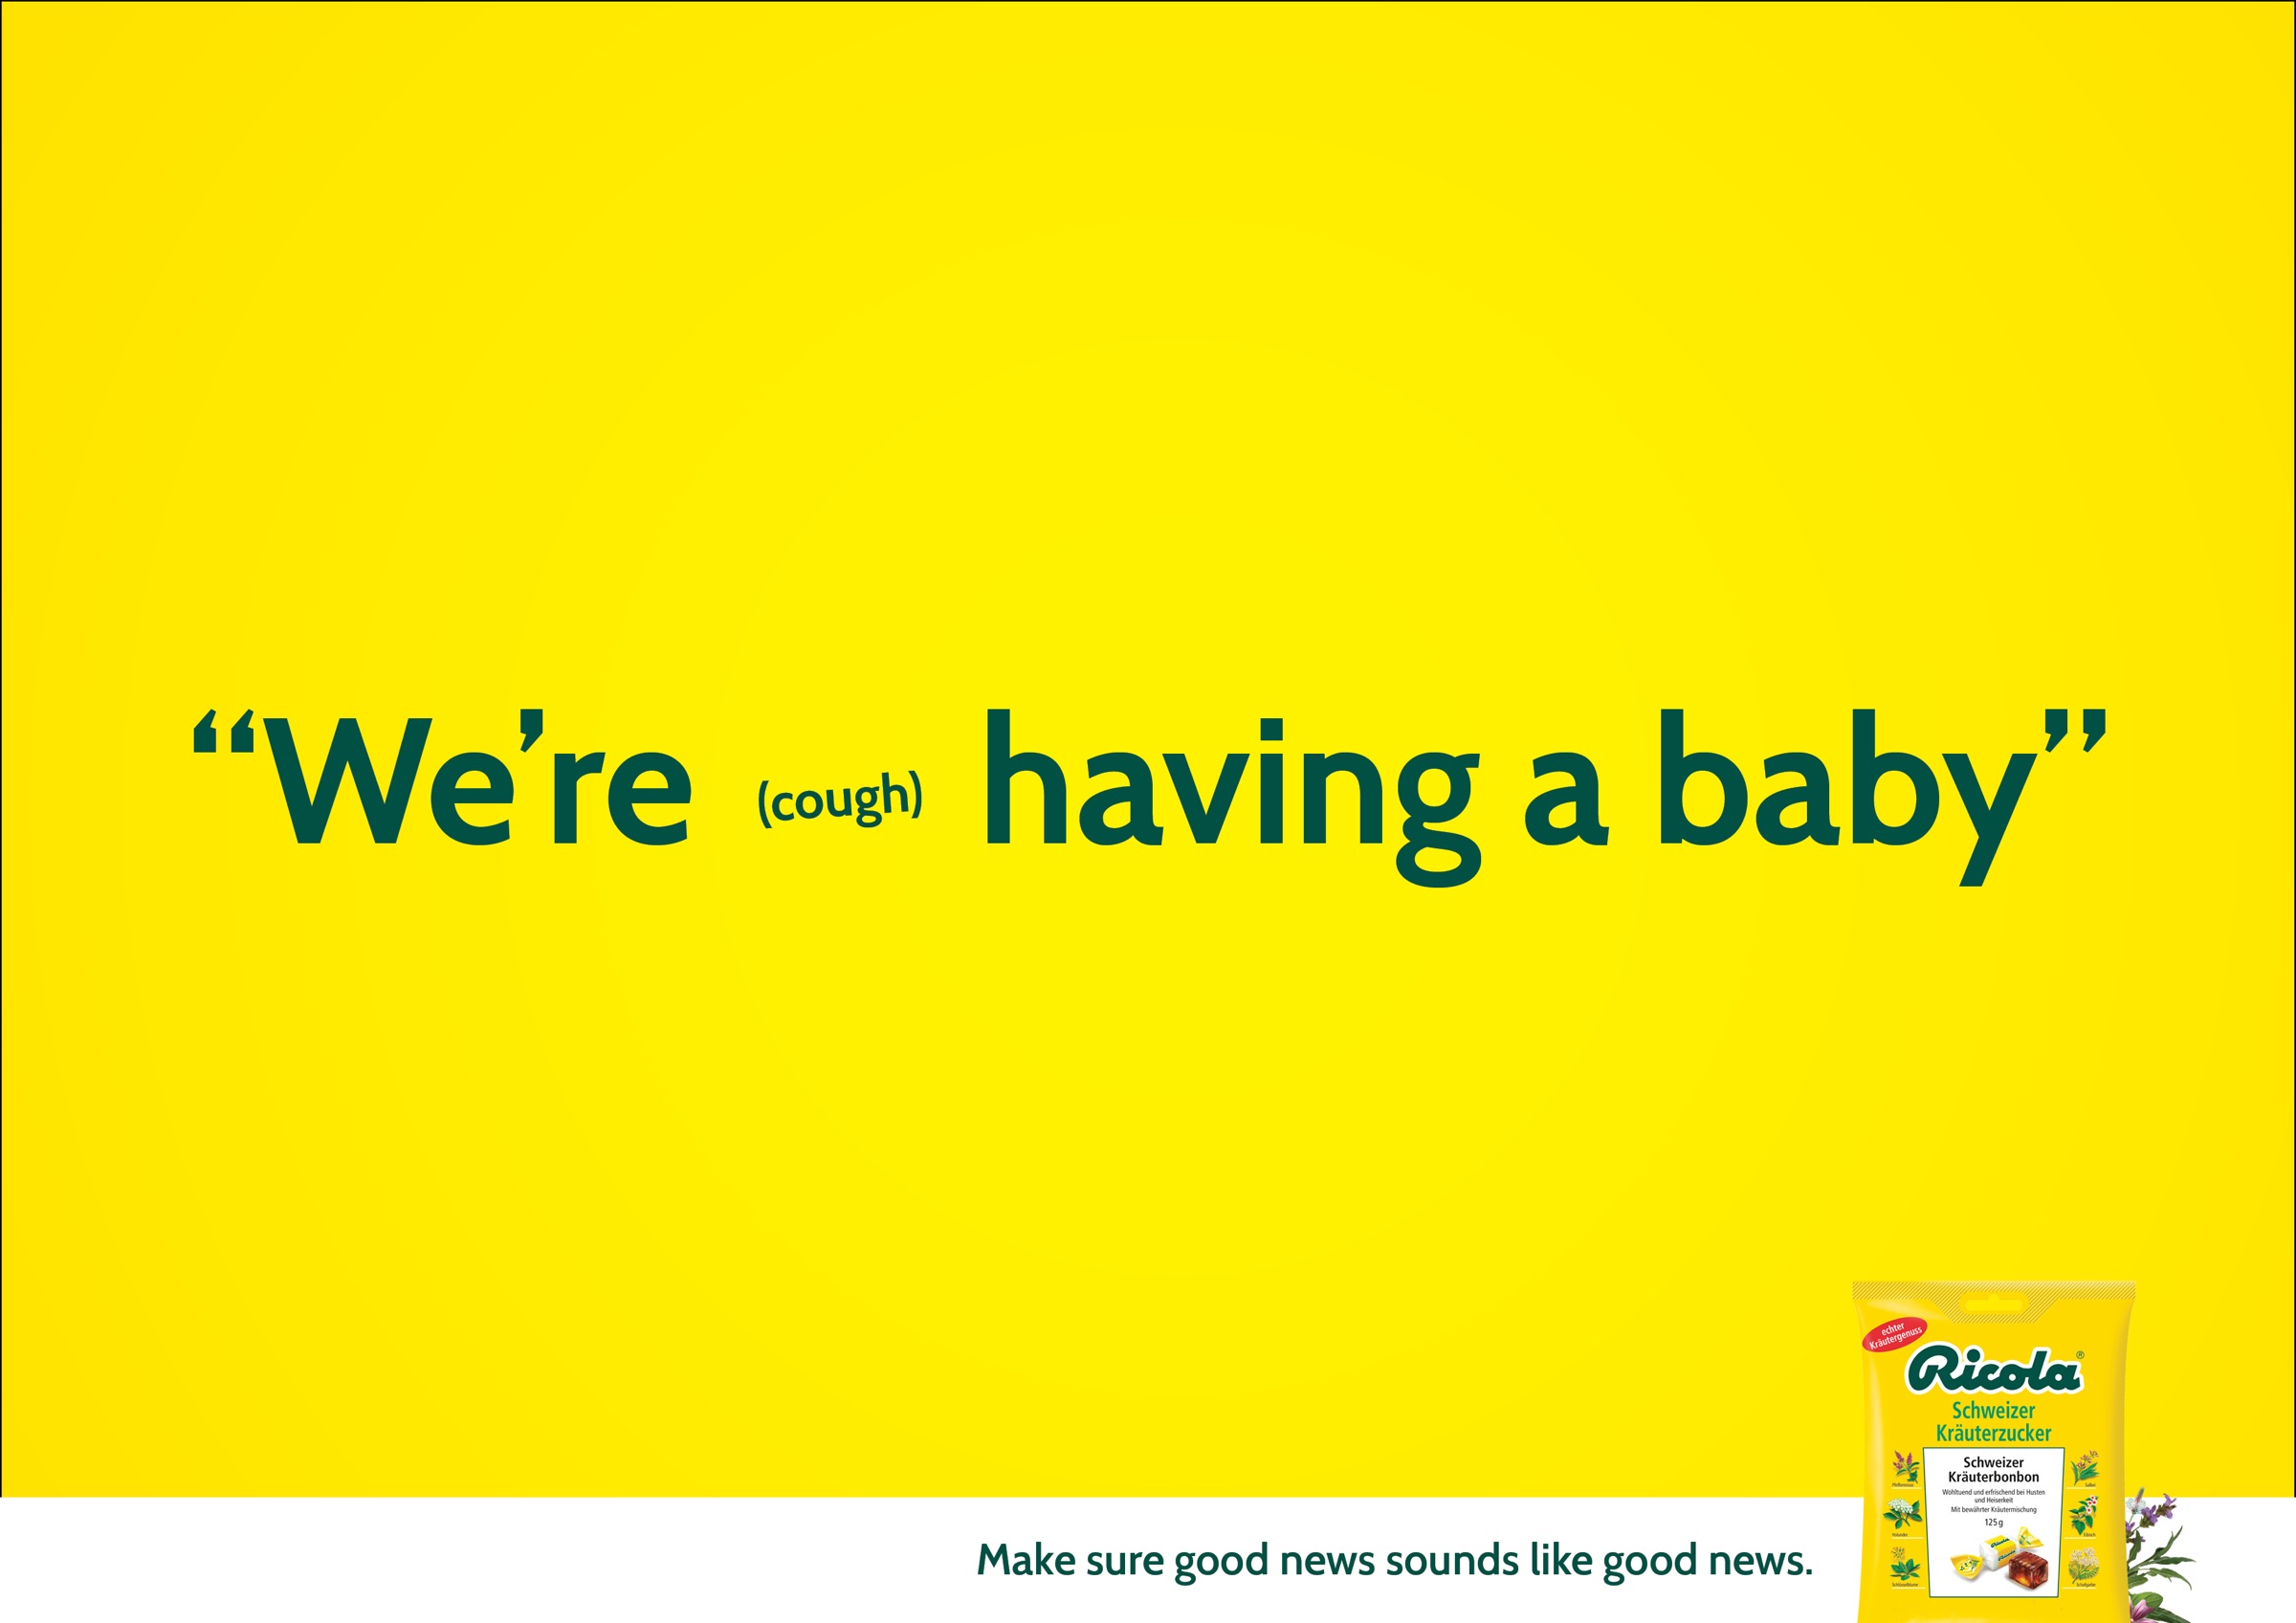 Ricola - Make sure good news sound like good news. Have a baby too young and it'll control your life. # Campaigns of the World®